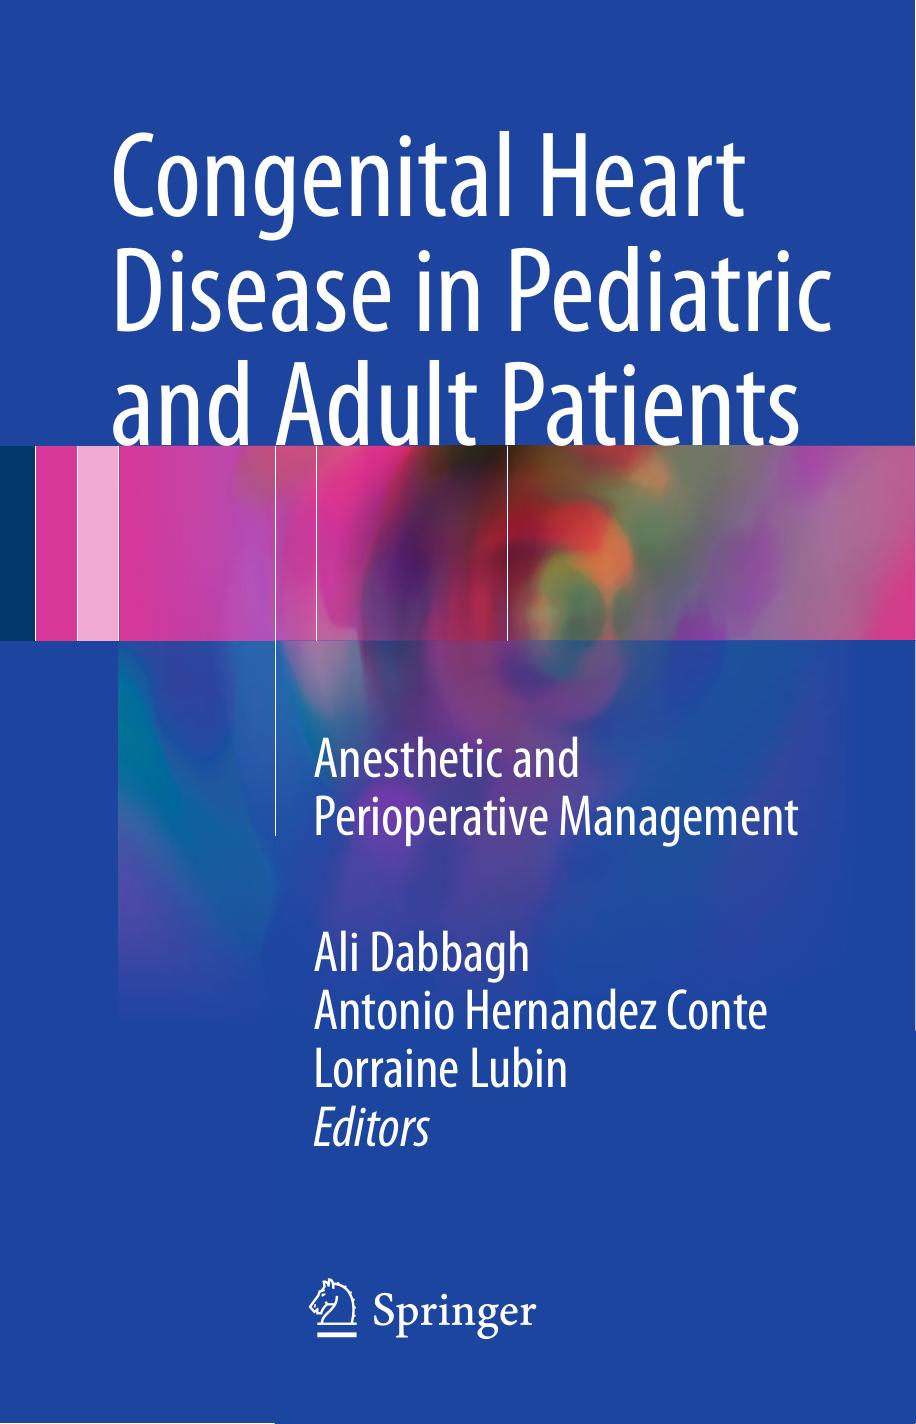 Congenital Heart Disease in Pediatric and Adult Patients  Anesthetic and Perioperative Management (2017)